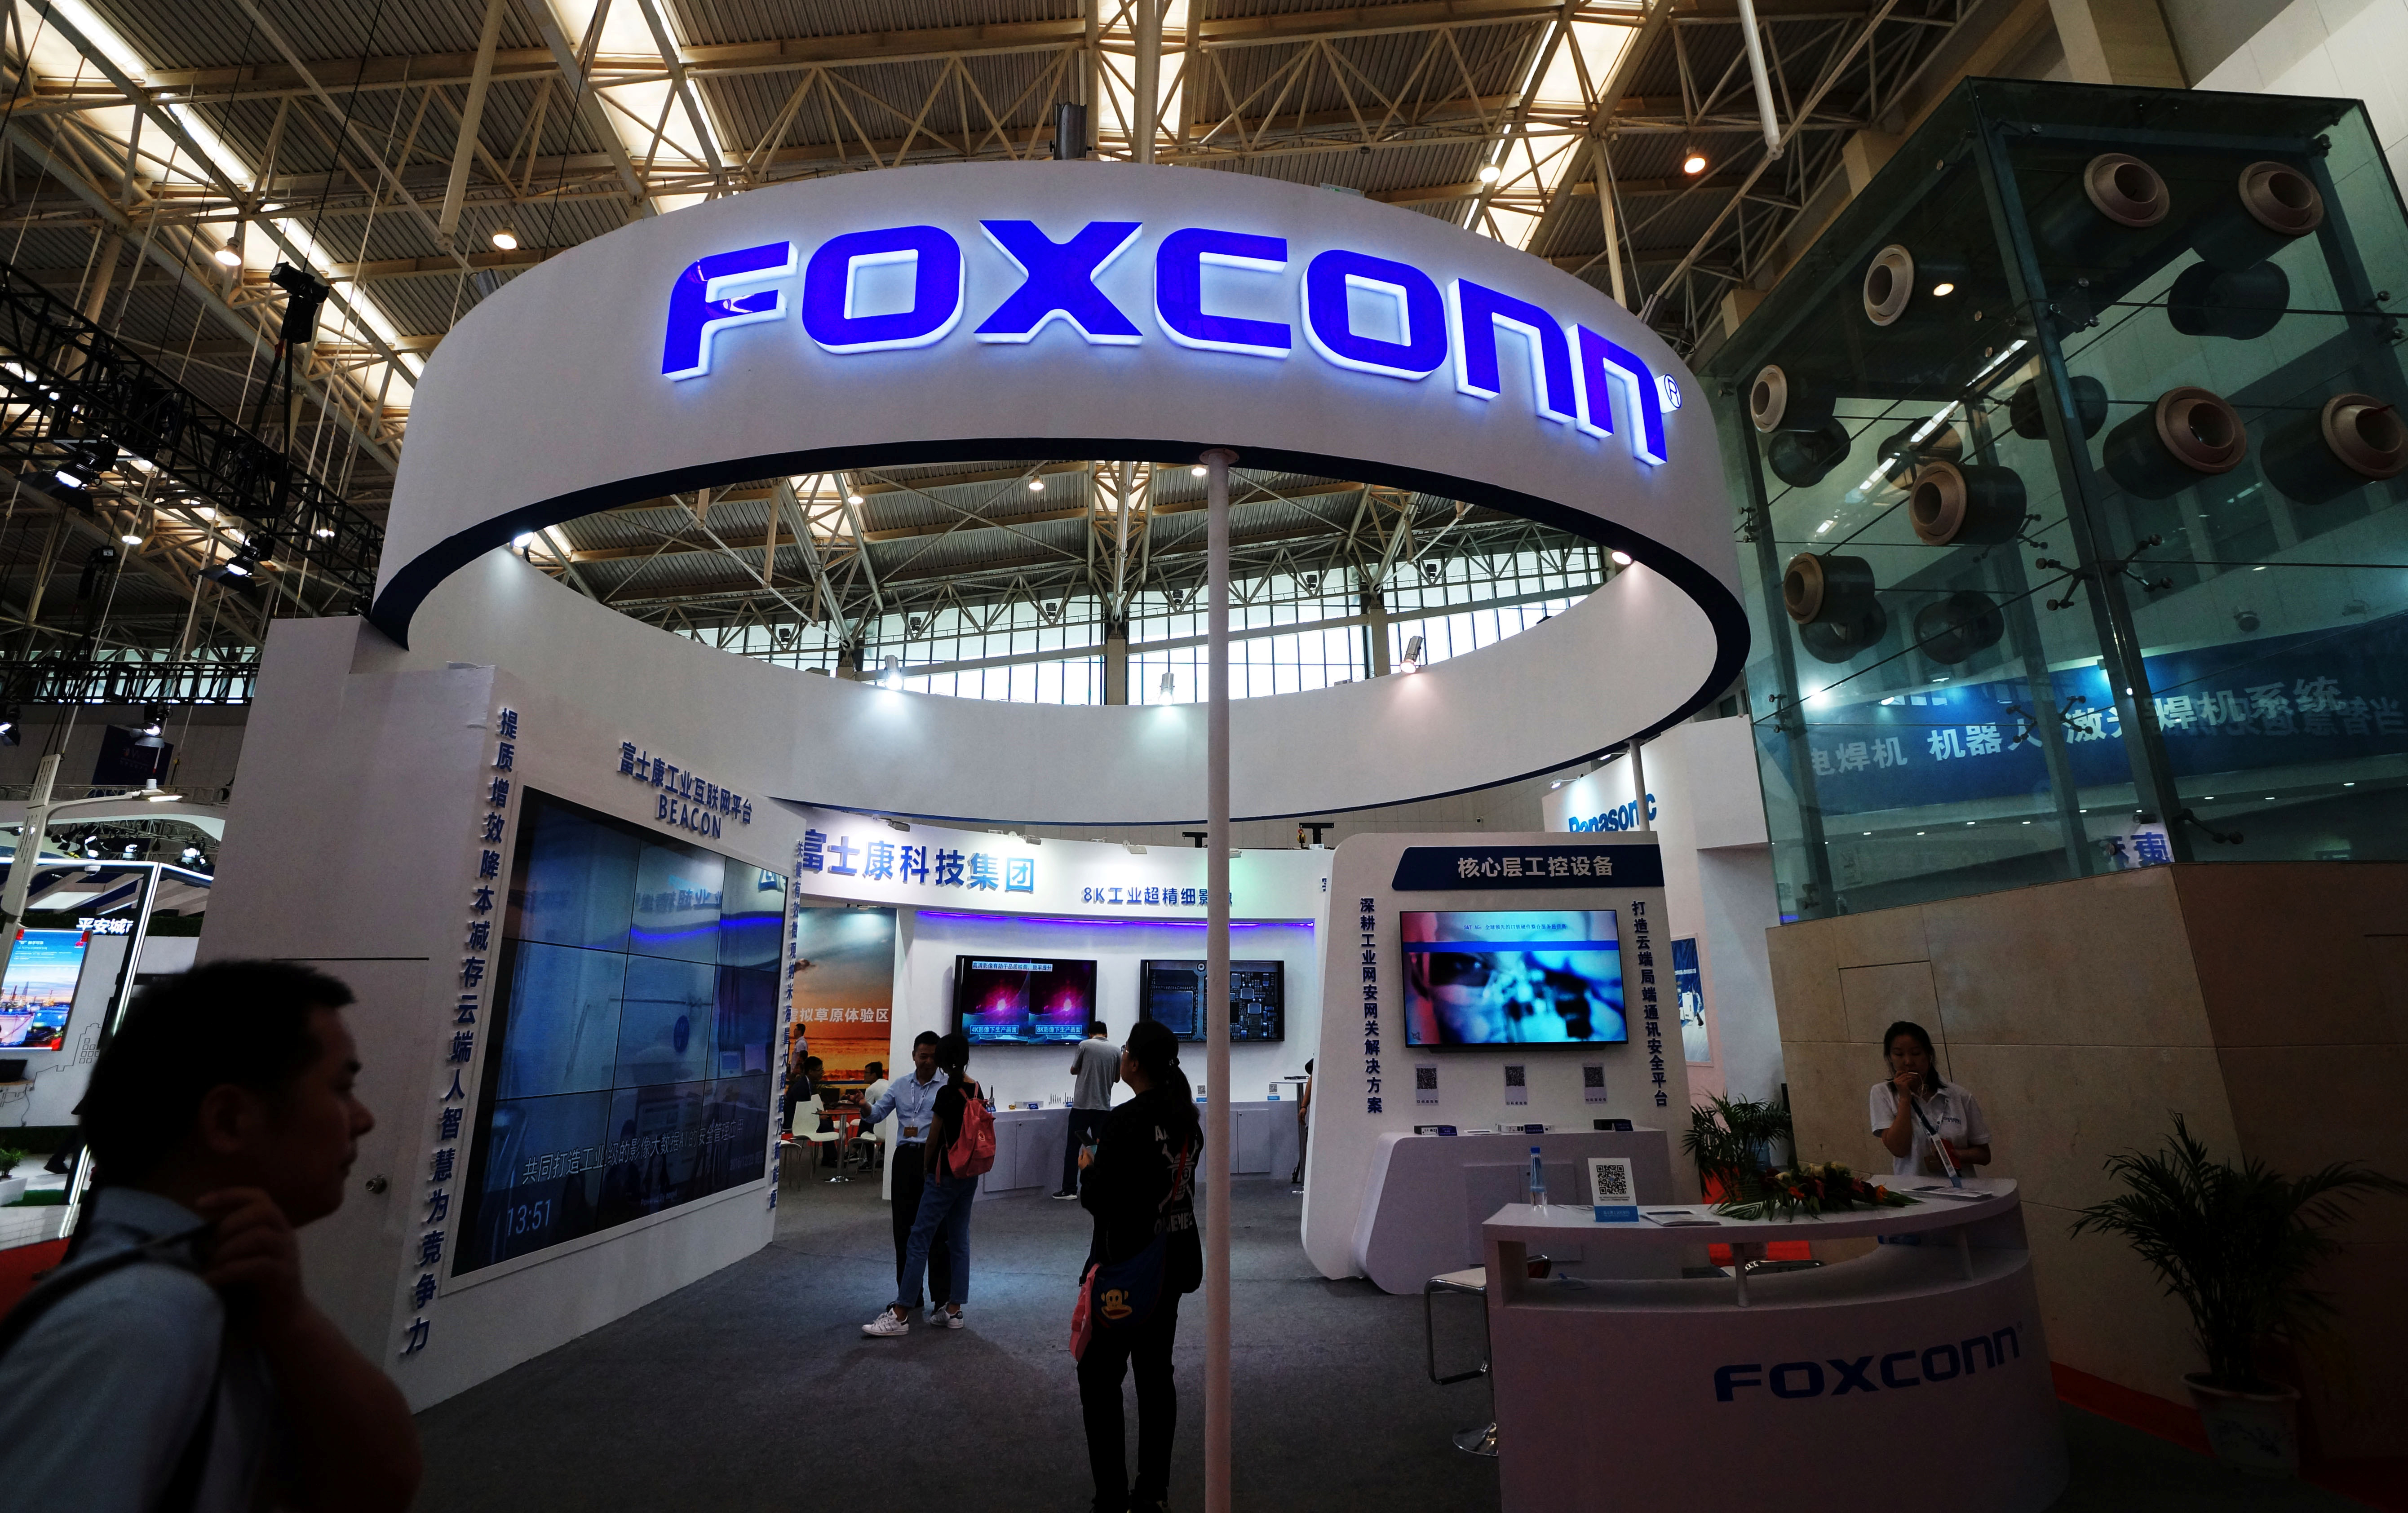 Visitors are seen at a Foxconn booth at the World Intelligence Congress in Tianjin